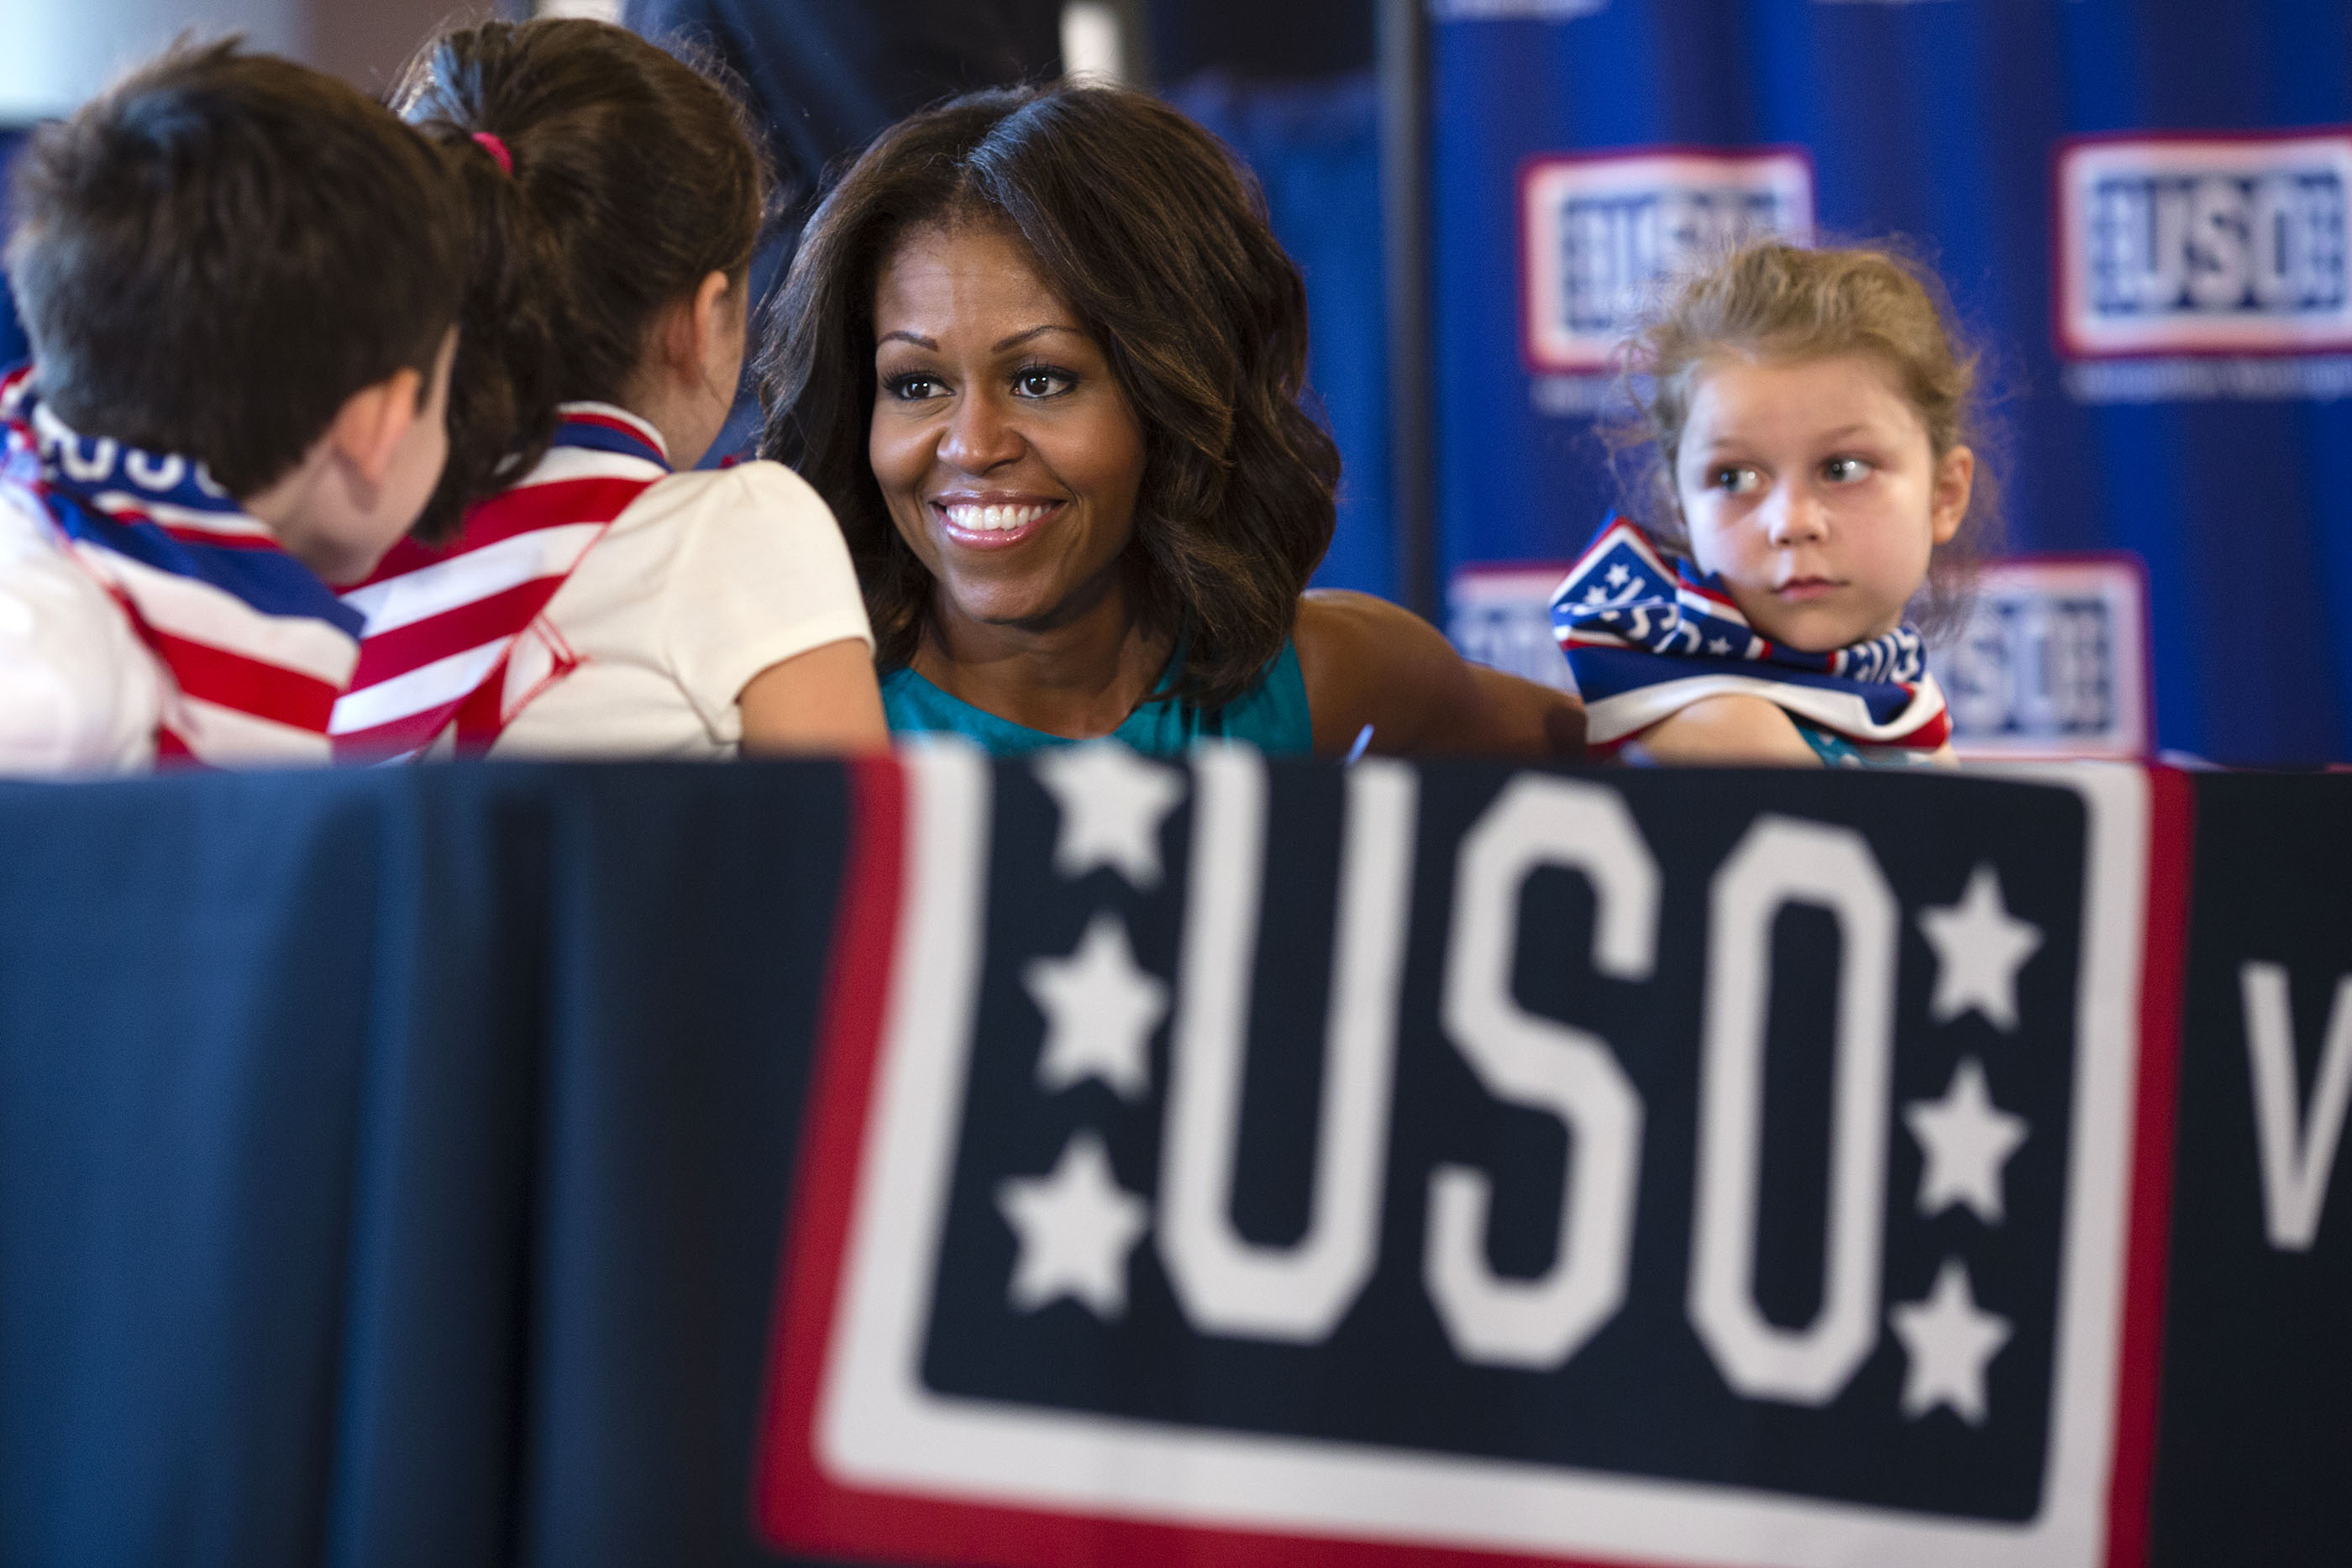 The First Lady joins children in an American flag art project at the USO Warrior and Family Center in Ft. Belvoir, Va. Sept. 11, 2013. (Official White House Photo by Lawrence Jackson)